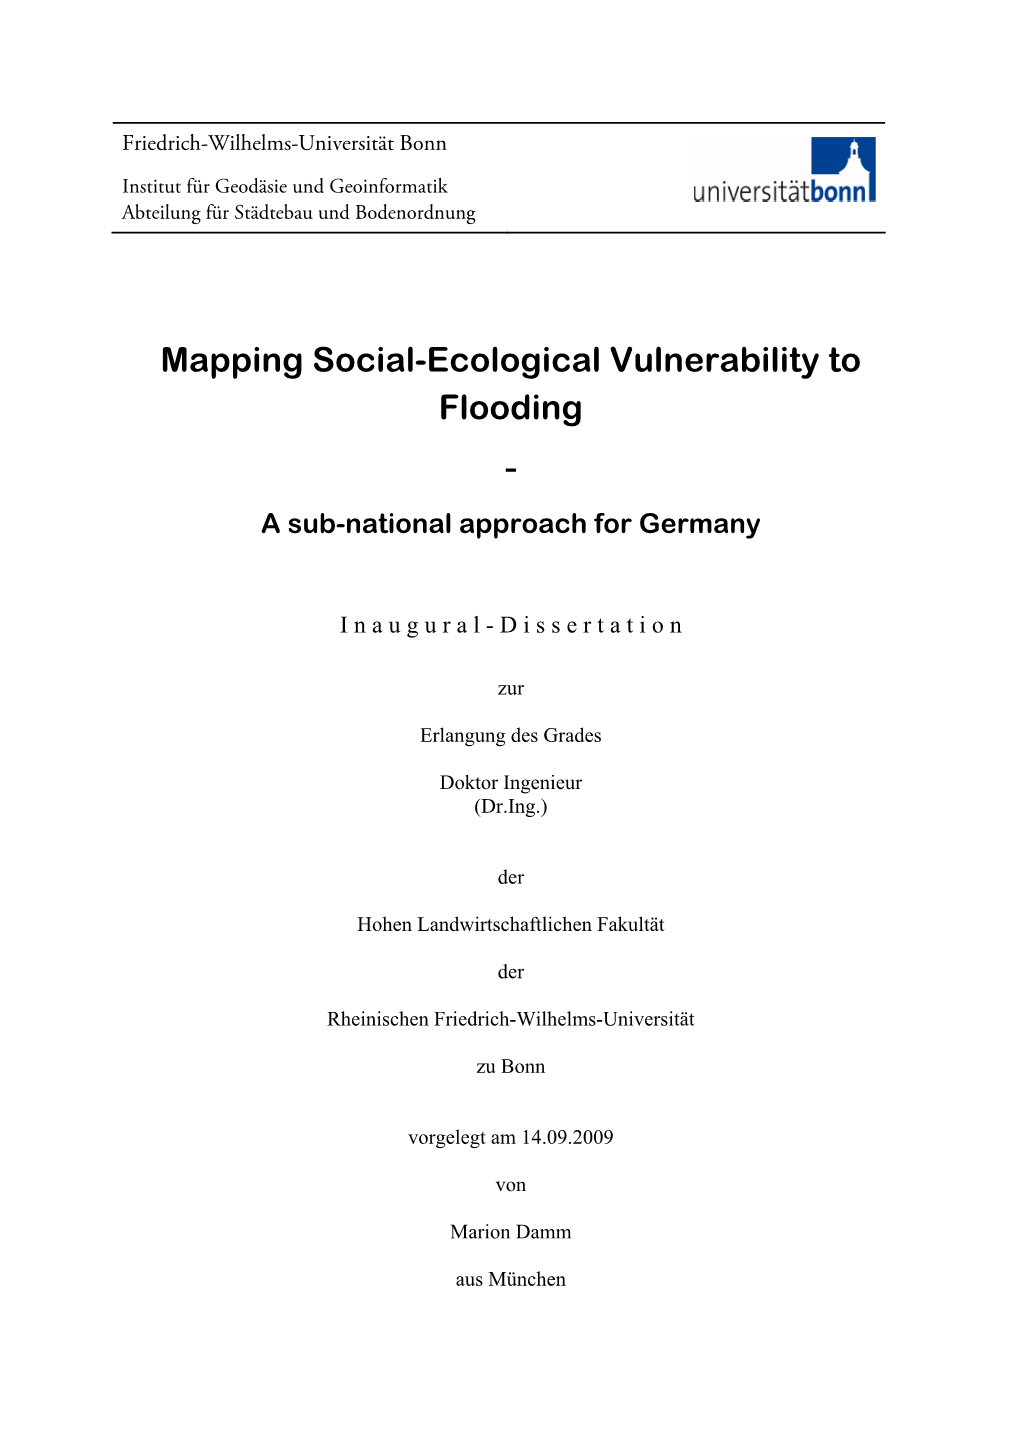 Mapping Social-Ecological Vulnerability to Flooding - a Sub-National Approach for Germany